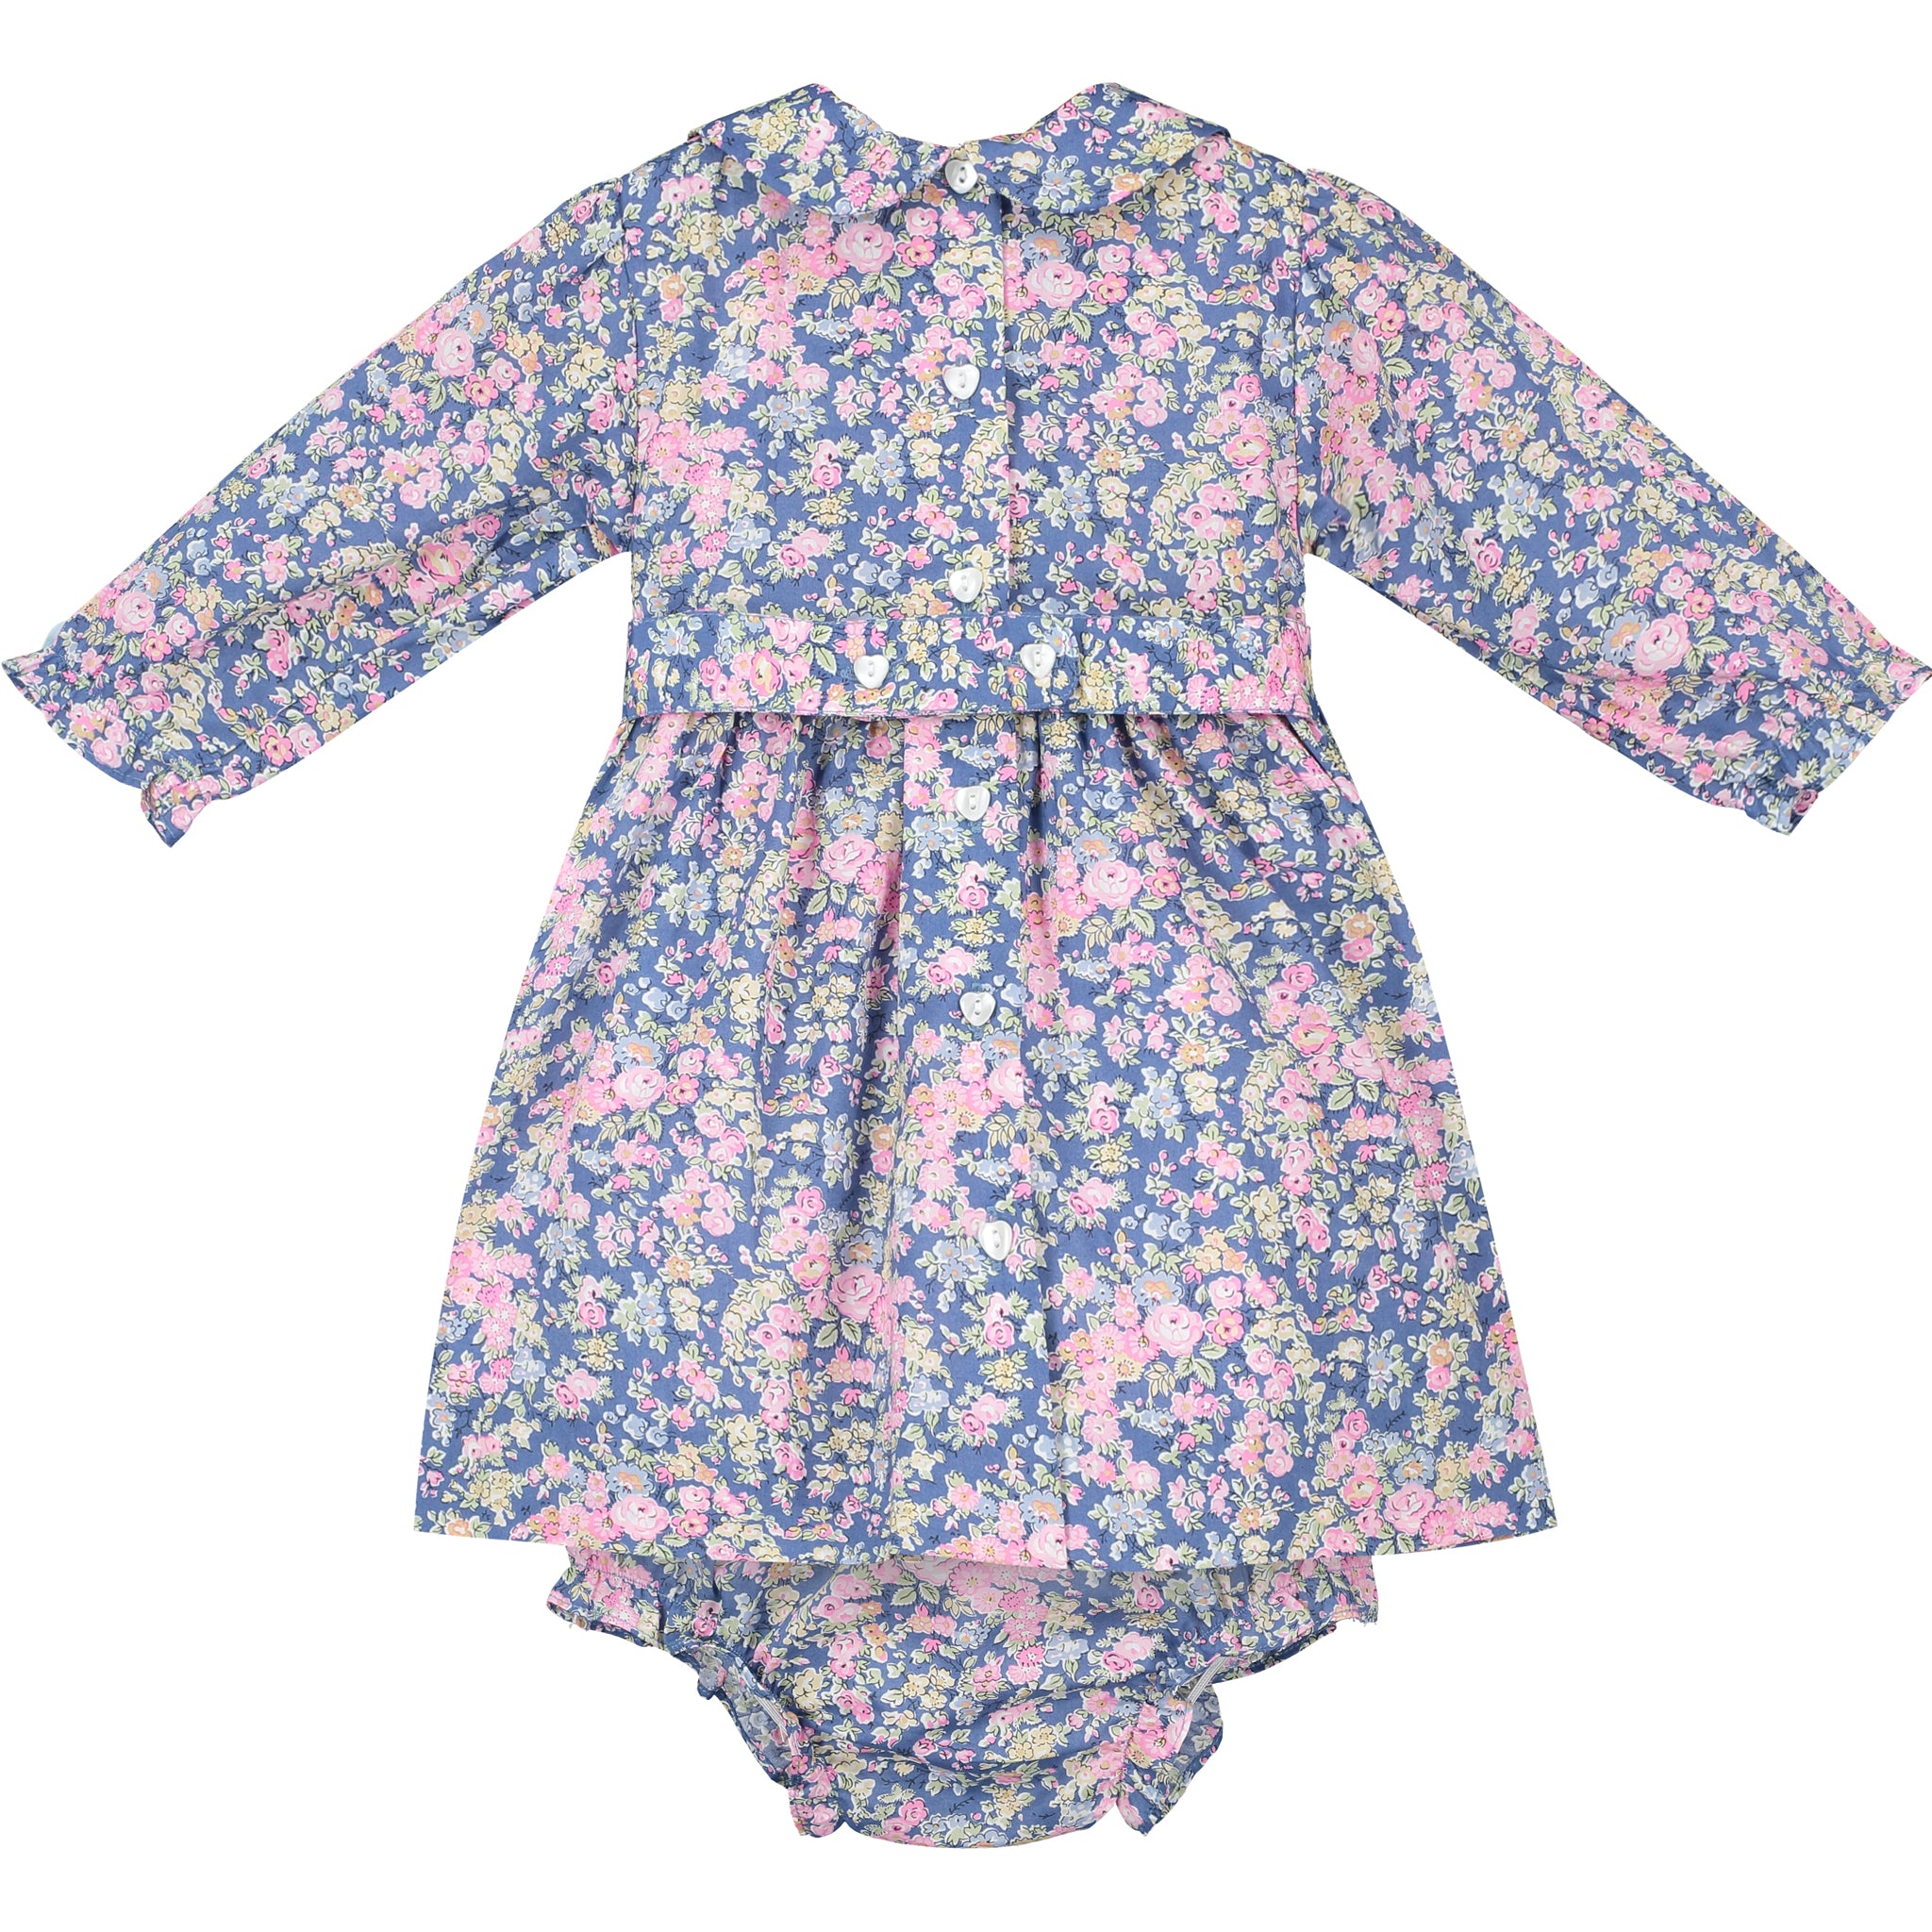 long-sleeve foral baby dress with smocking, back